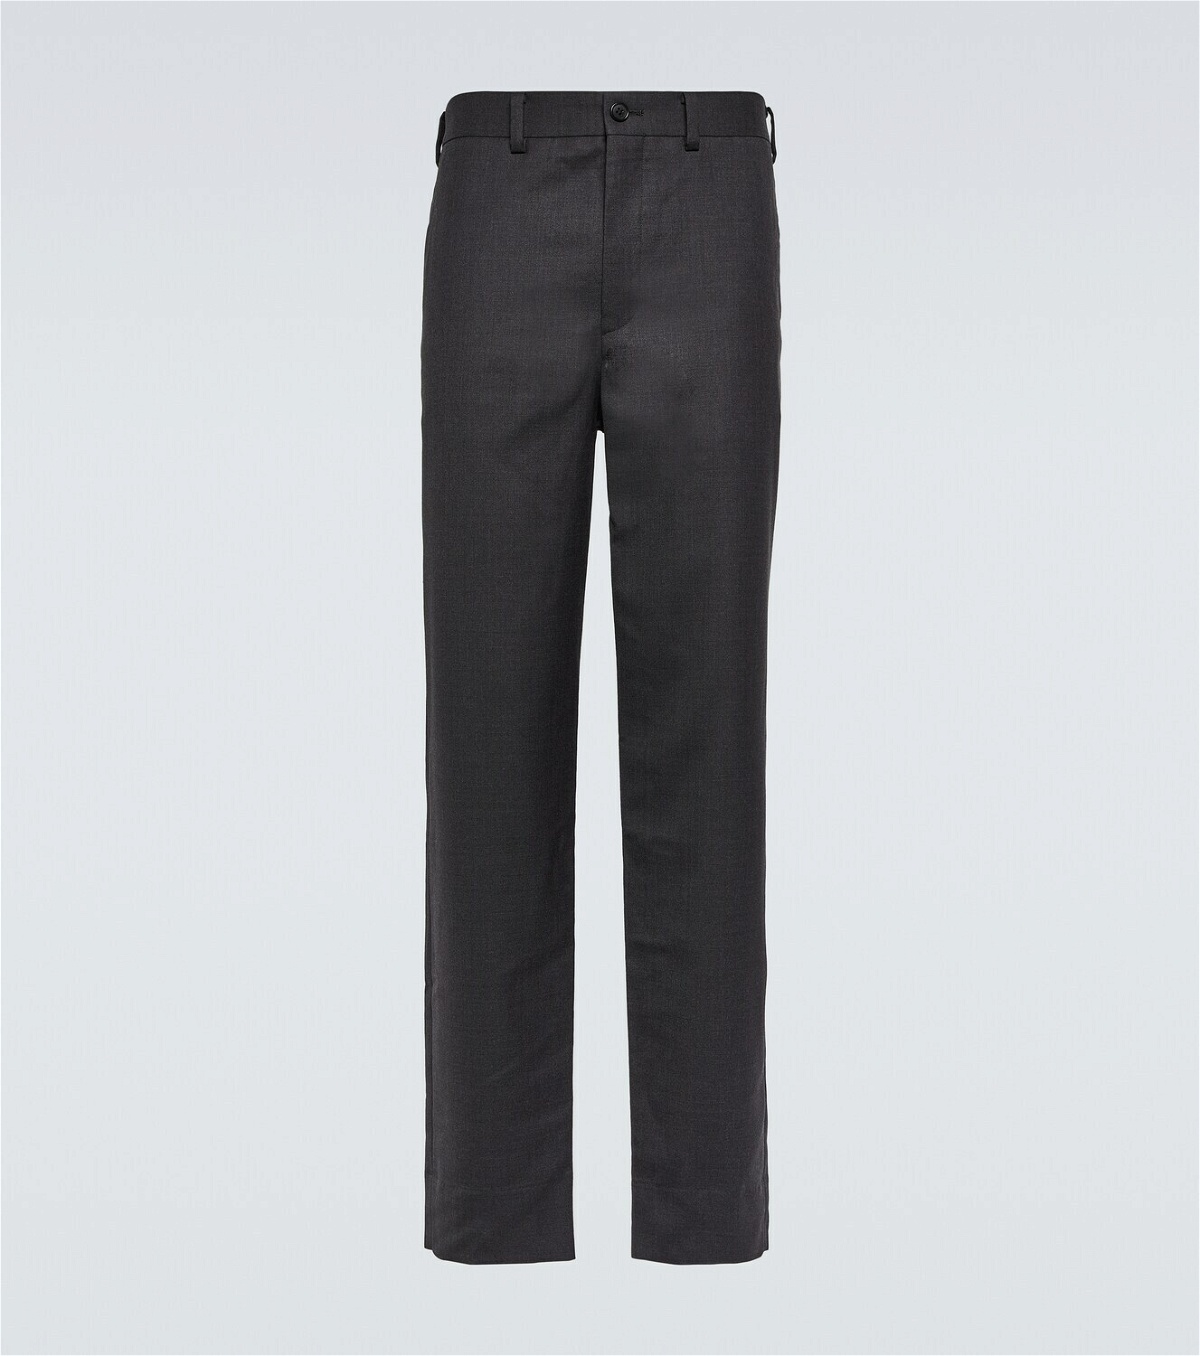 Undercover Slim wool and mohair pants Undercover